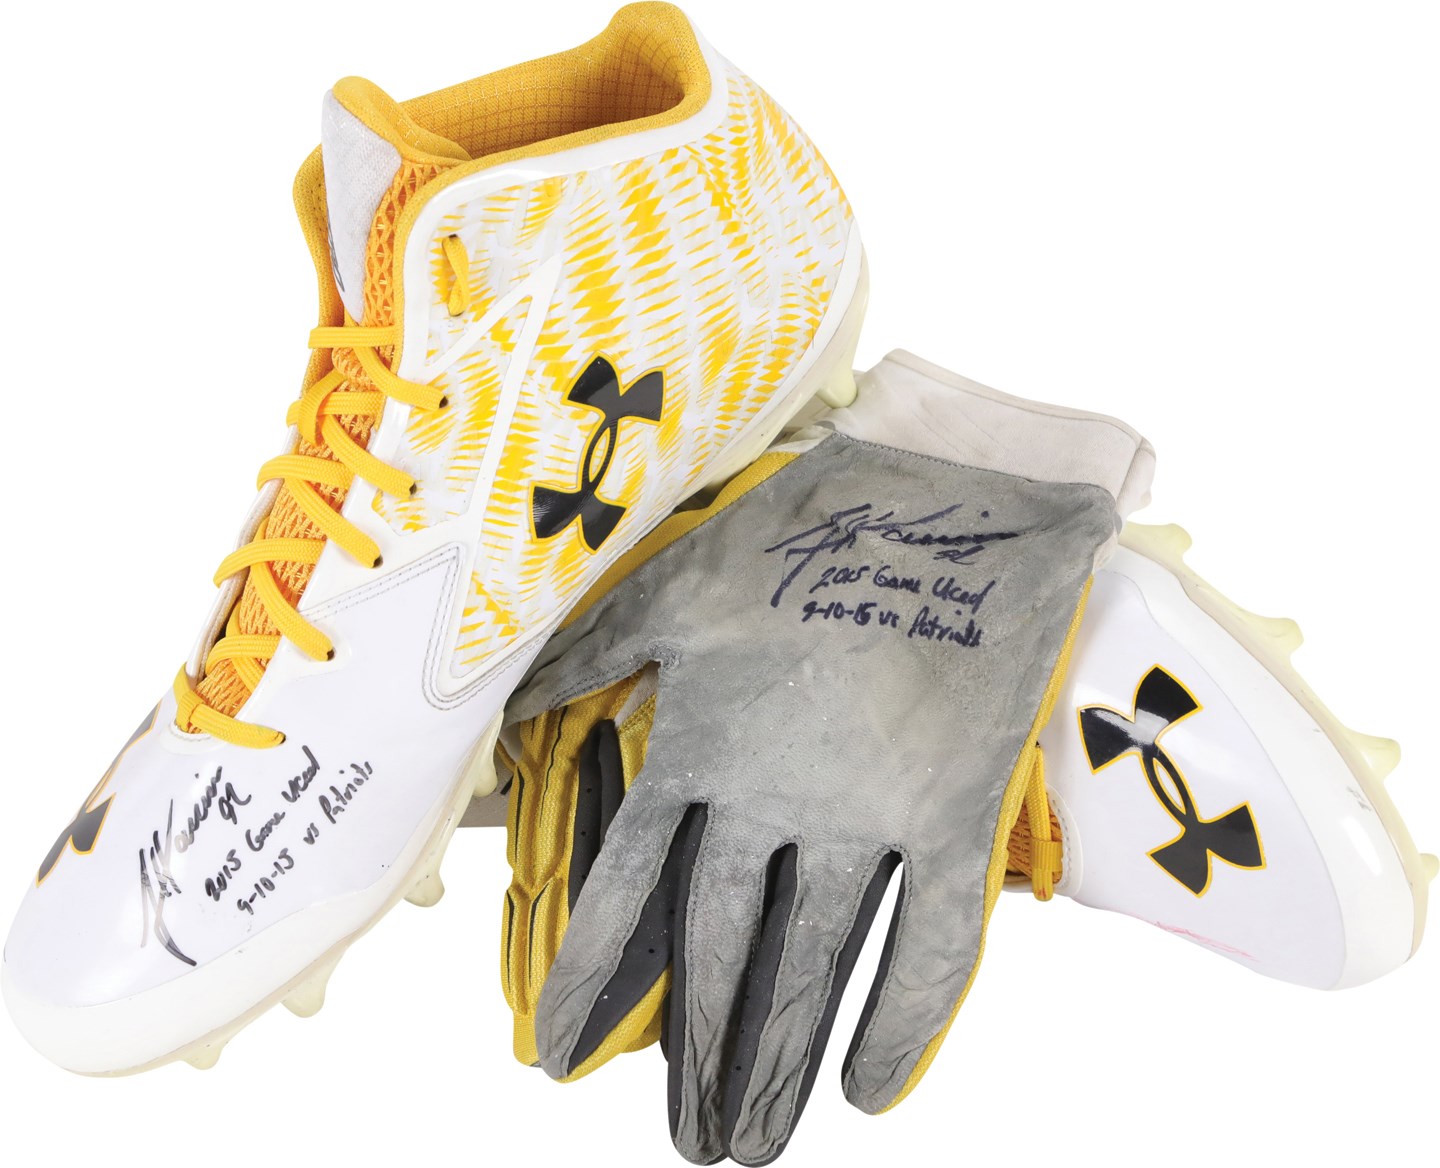 Football - 9/10/15 James Harrison Season Opener Pittsburgh Steelers Signed Game Worn Gloves and Cleats (Harrison Sourced & Beckett)